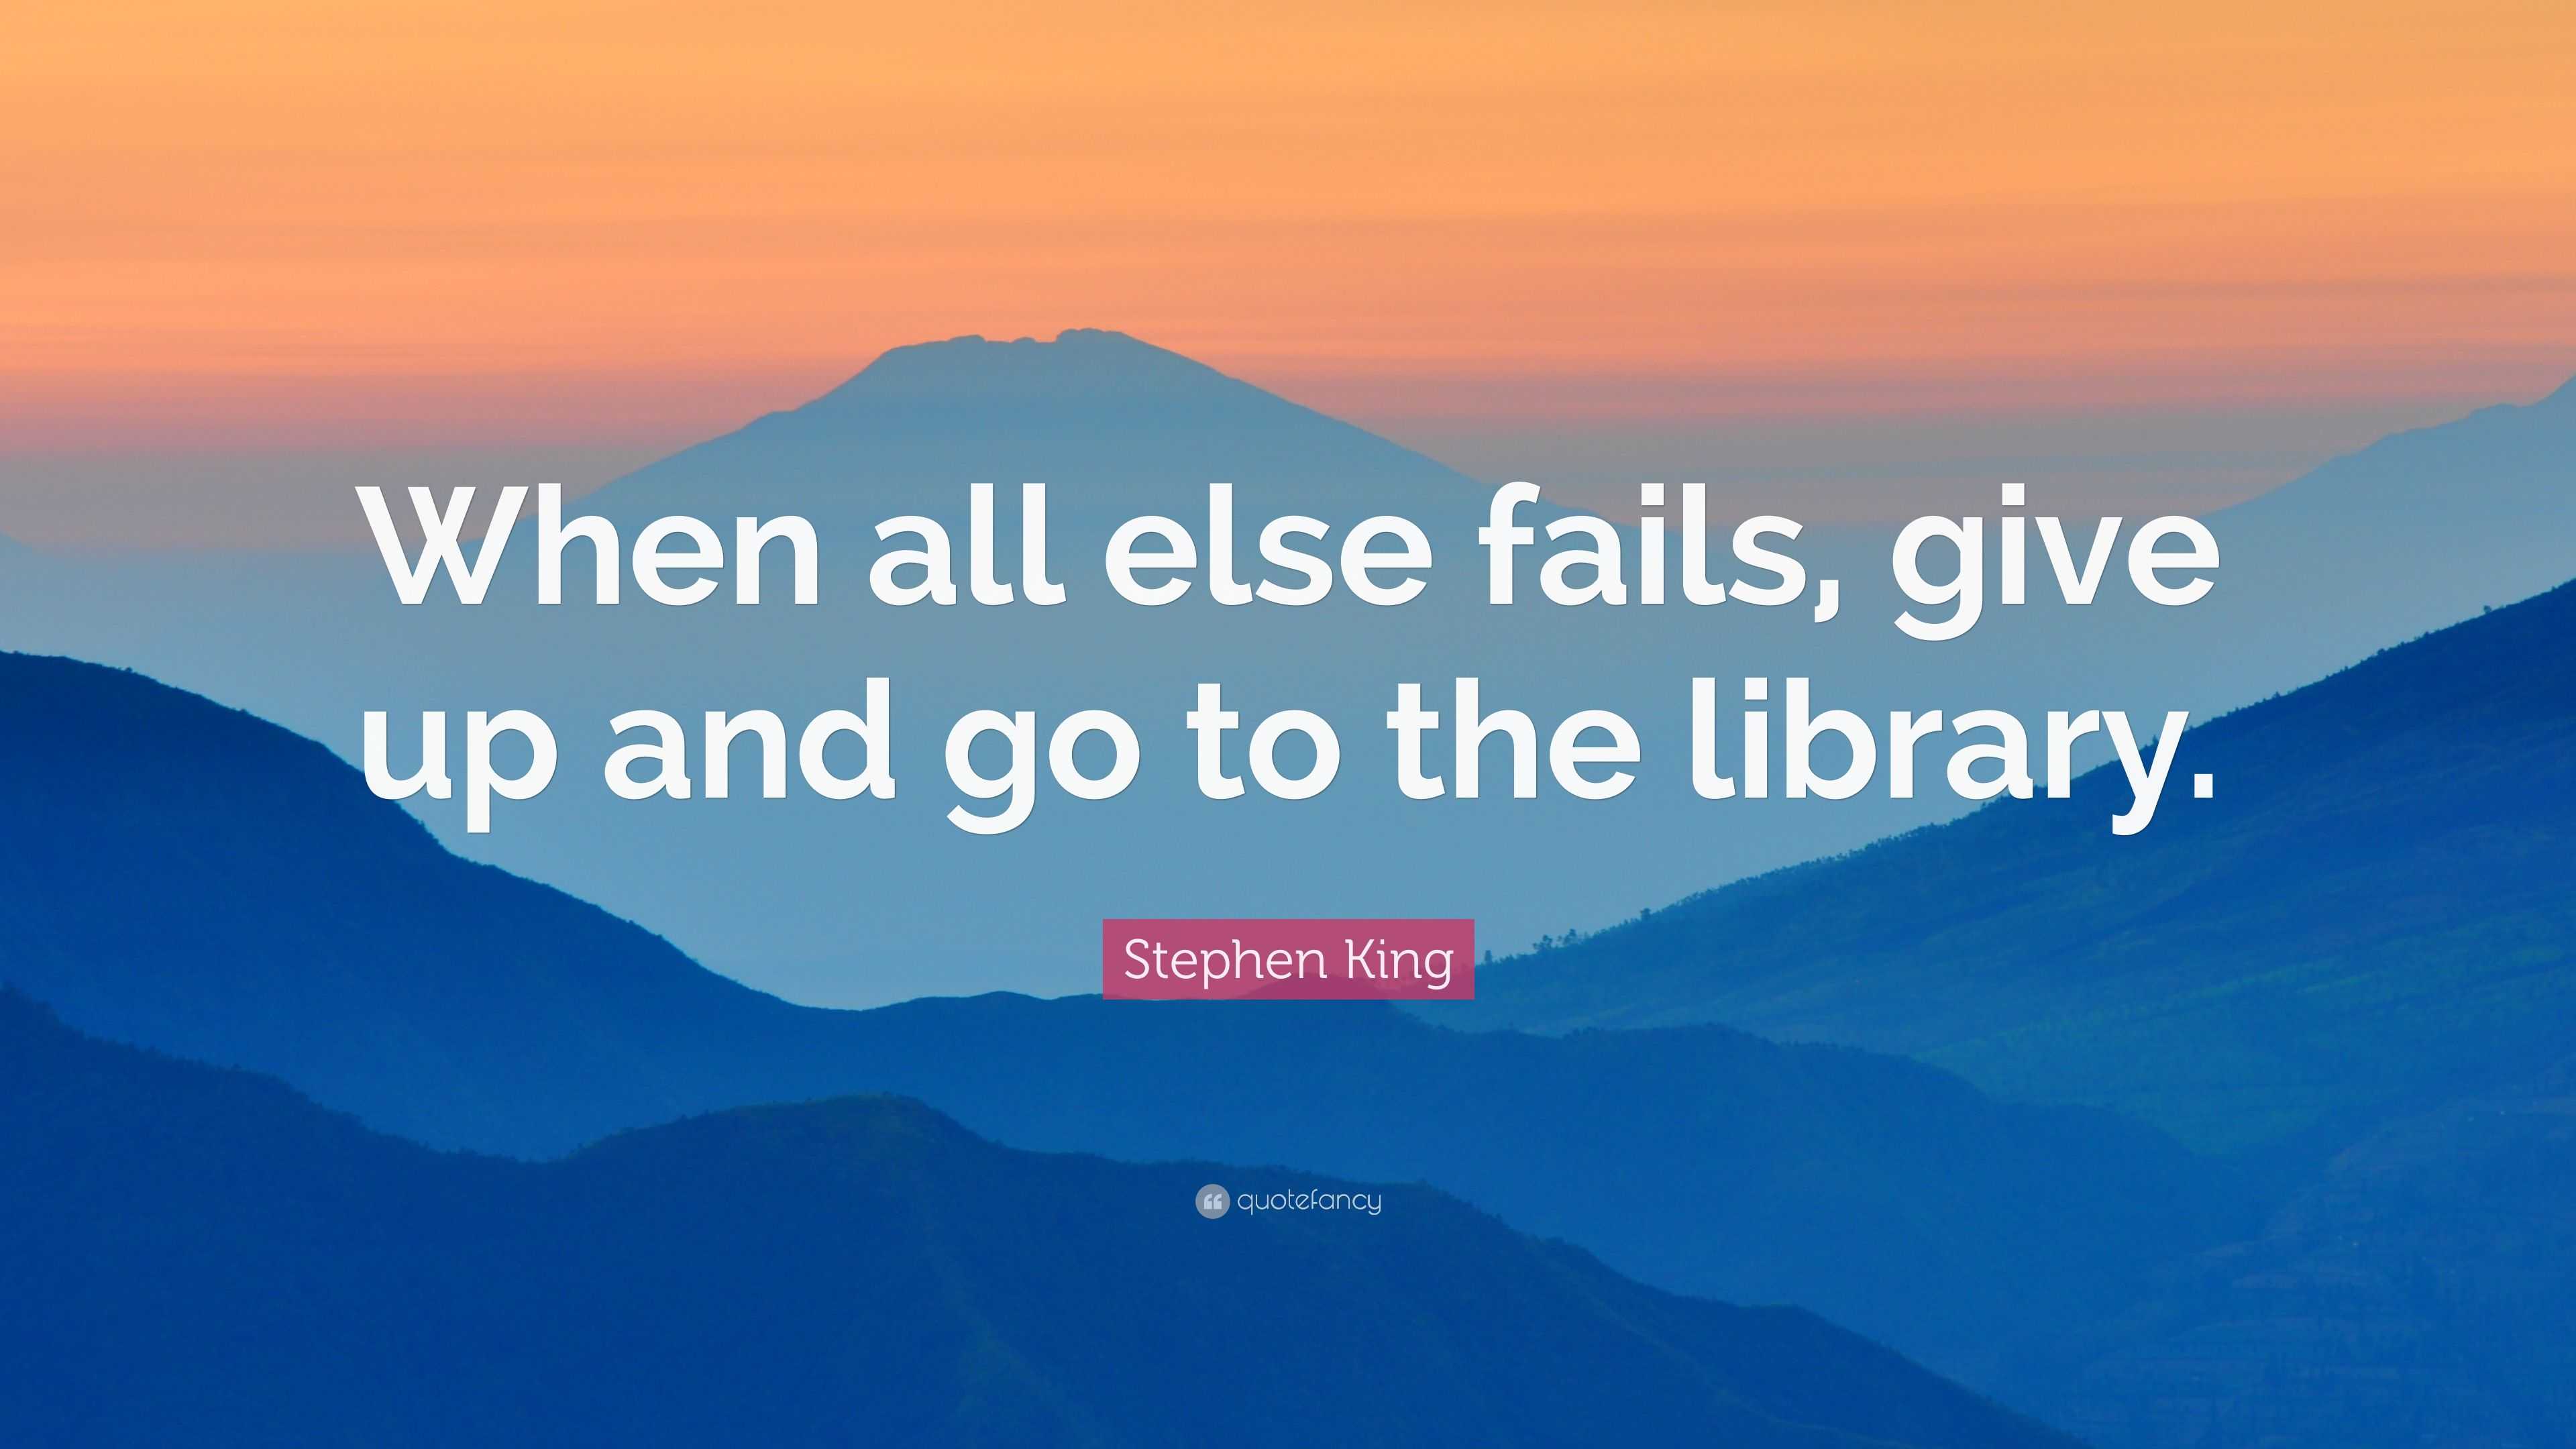 Stephen King Quote: “When all else fails, give up and go to the library.”